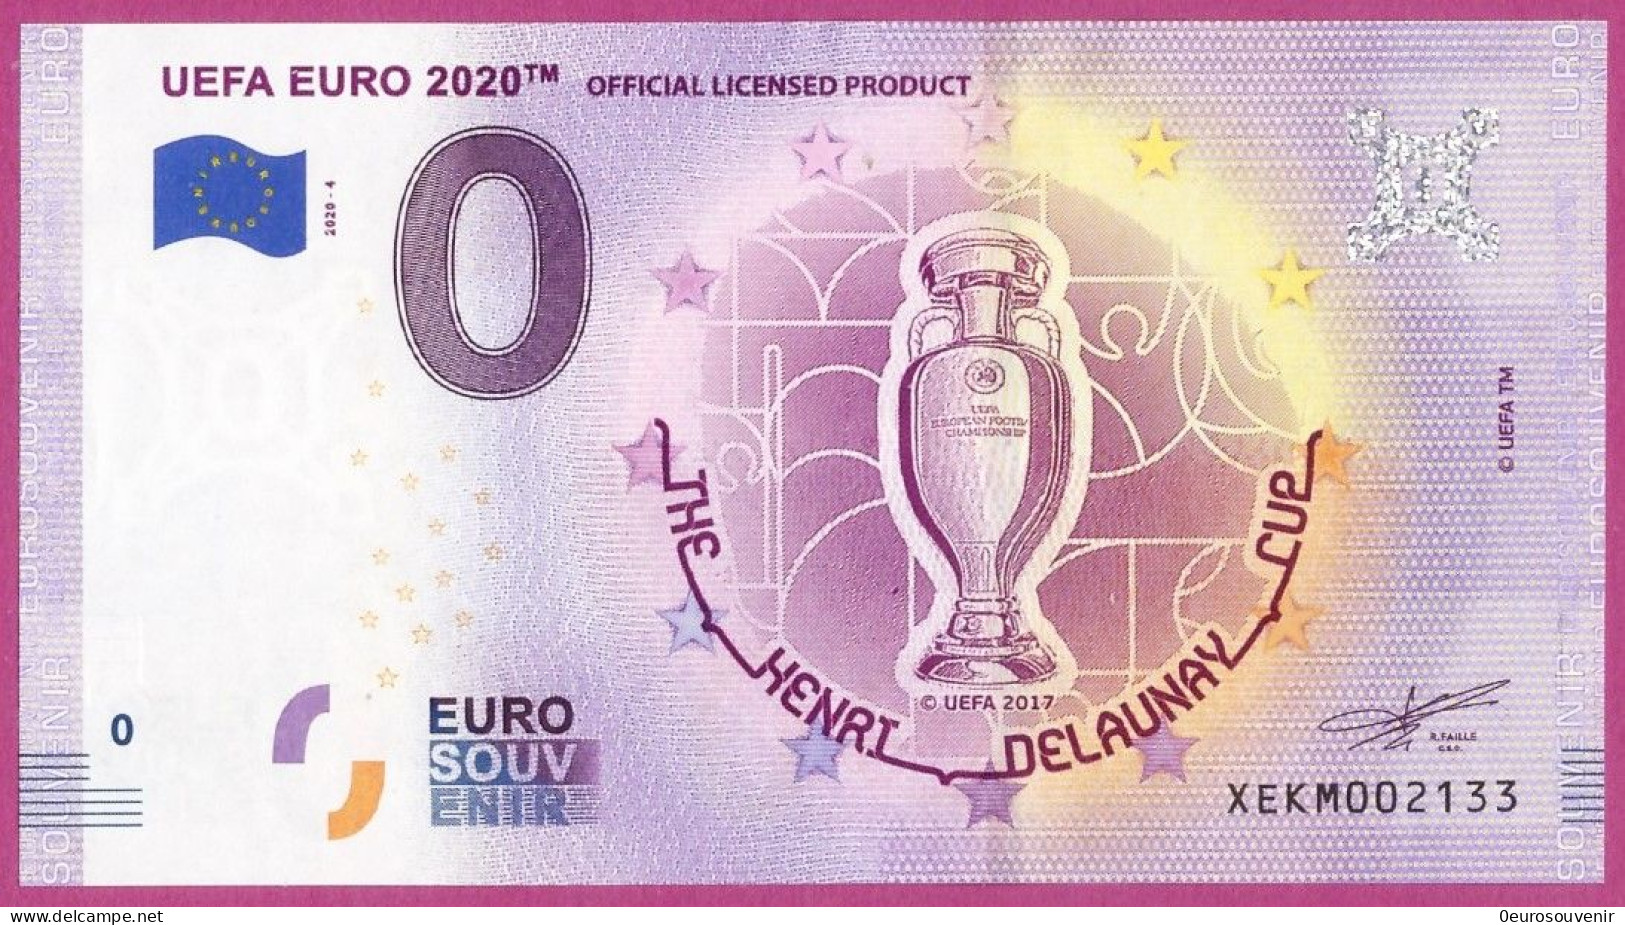 0-Euro XEKM 2020-4 UEFA EURO 2020 - OFFICIAL LICENSED PRODUCT - Prove Private